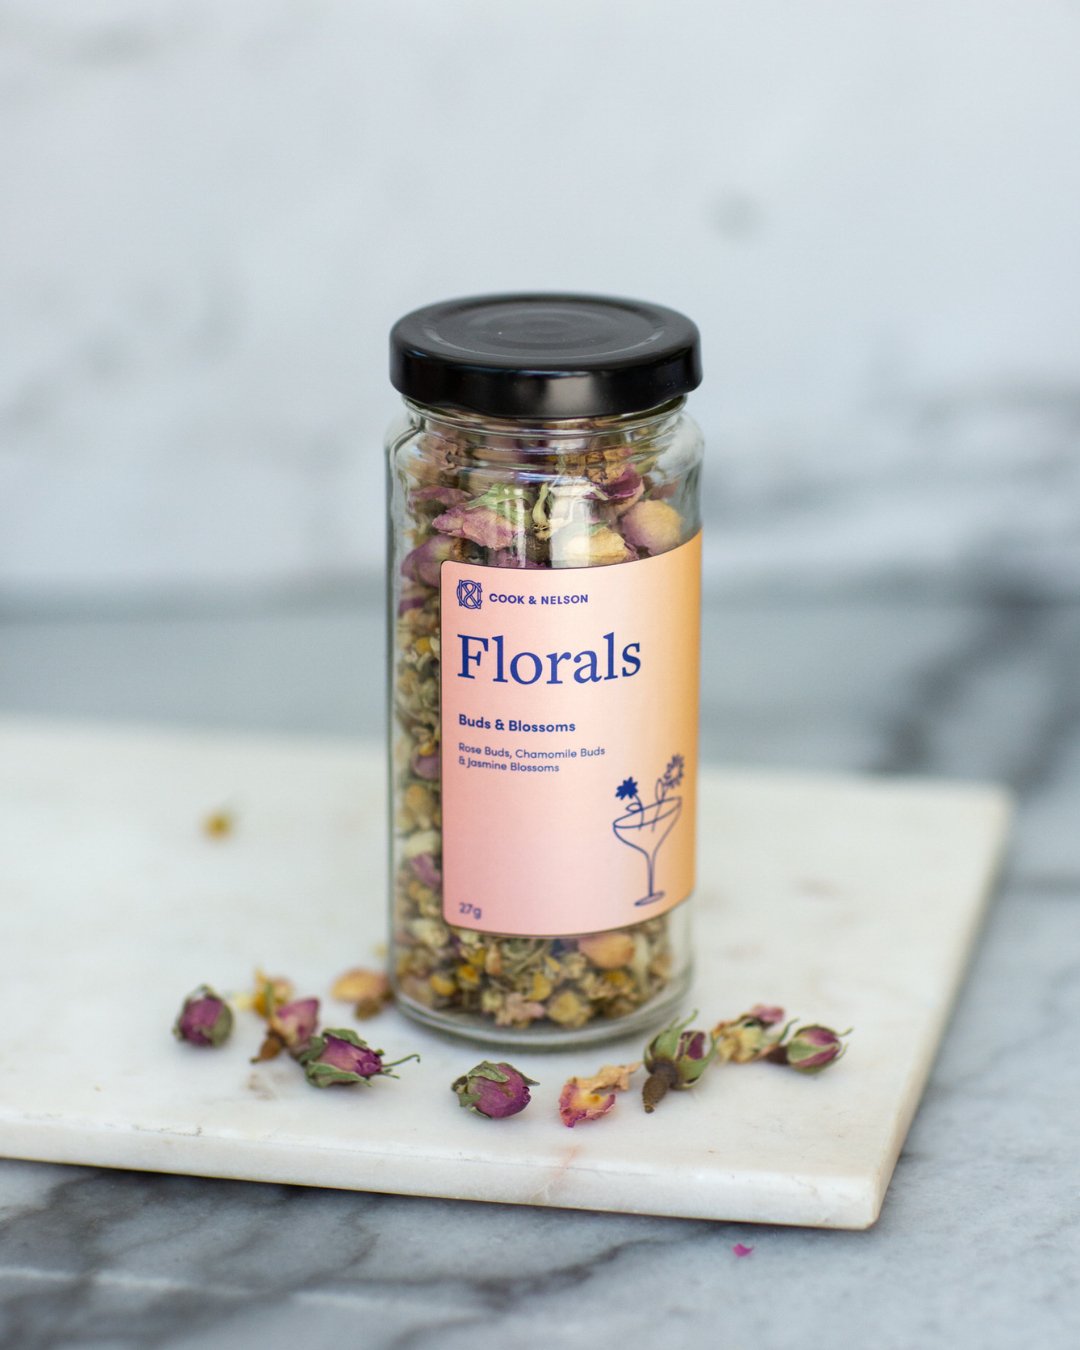 Florals - Cook & Nelson